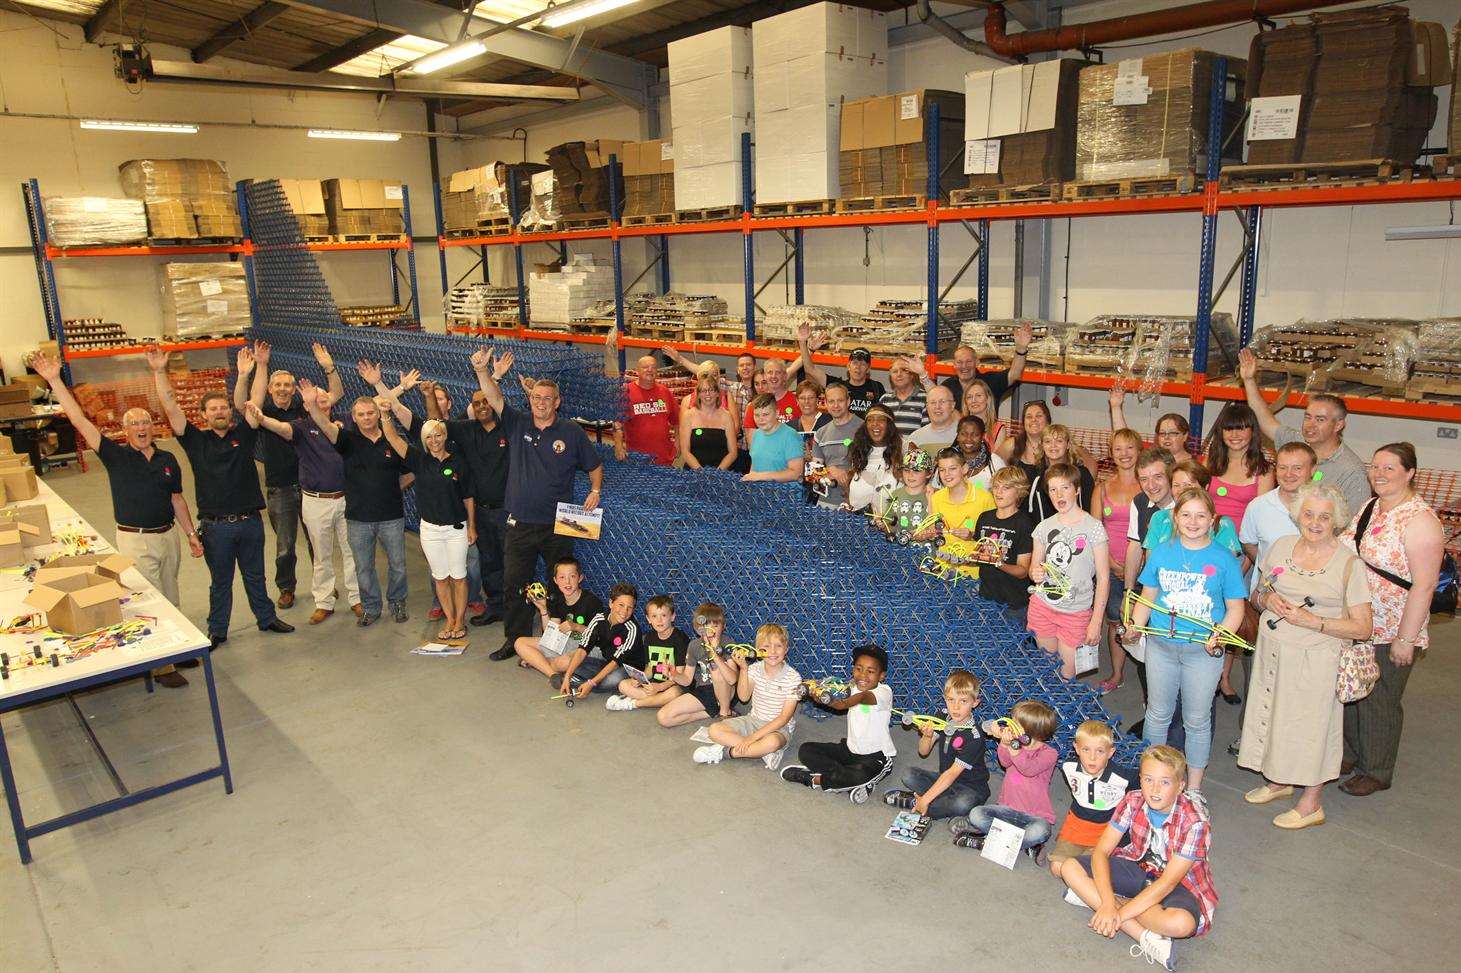 Volunteers and "Bloodhound" pose alongside the partially constructed replica land speed record car that was confirmed as the World's largest K'NEX structure